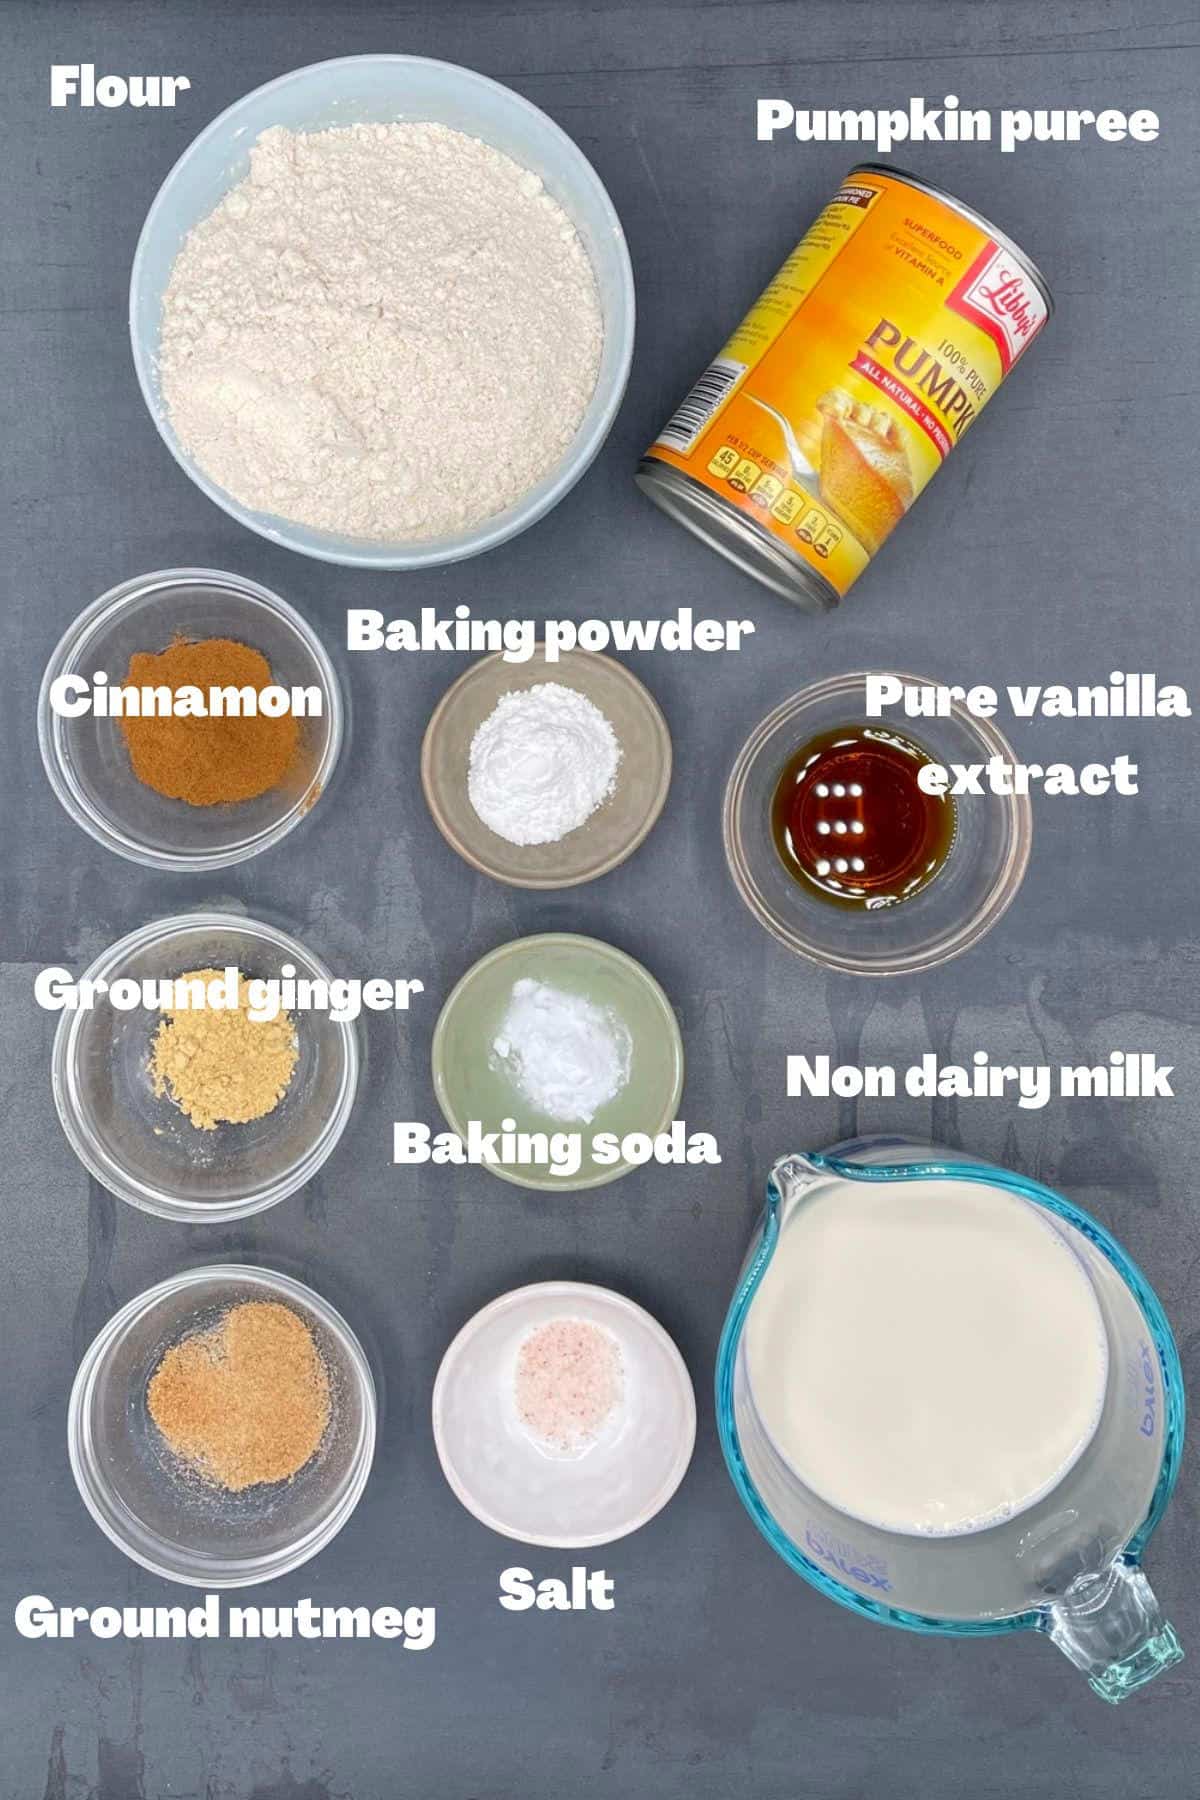 All ingredients for vegan pumpkin pancakes in bowls and cups.